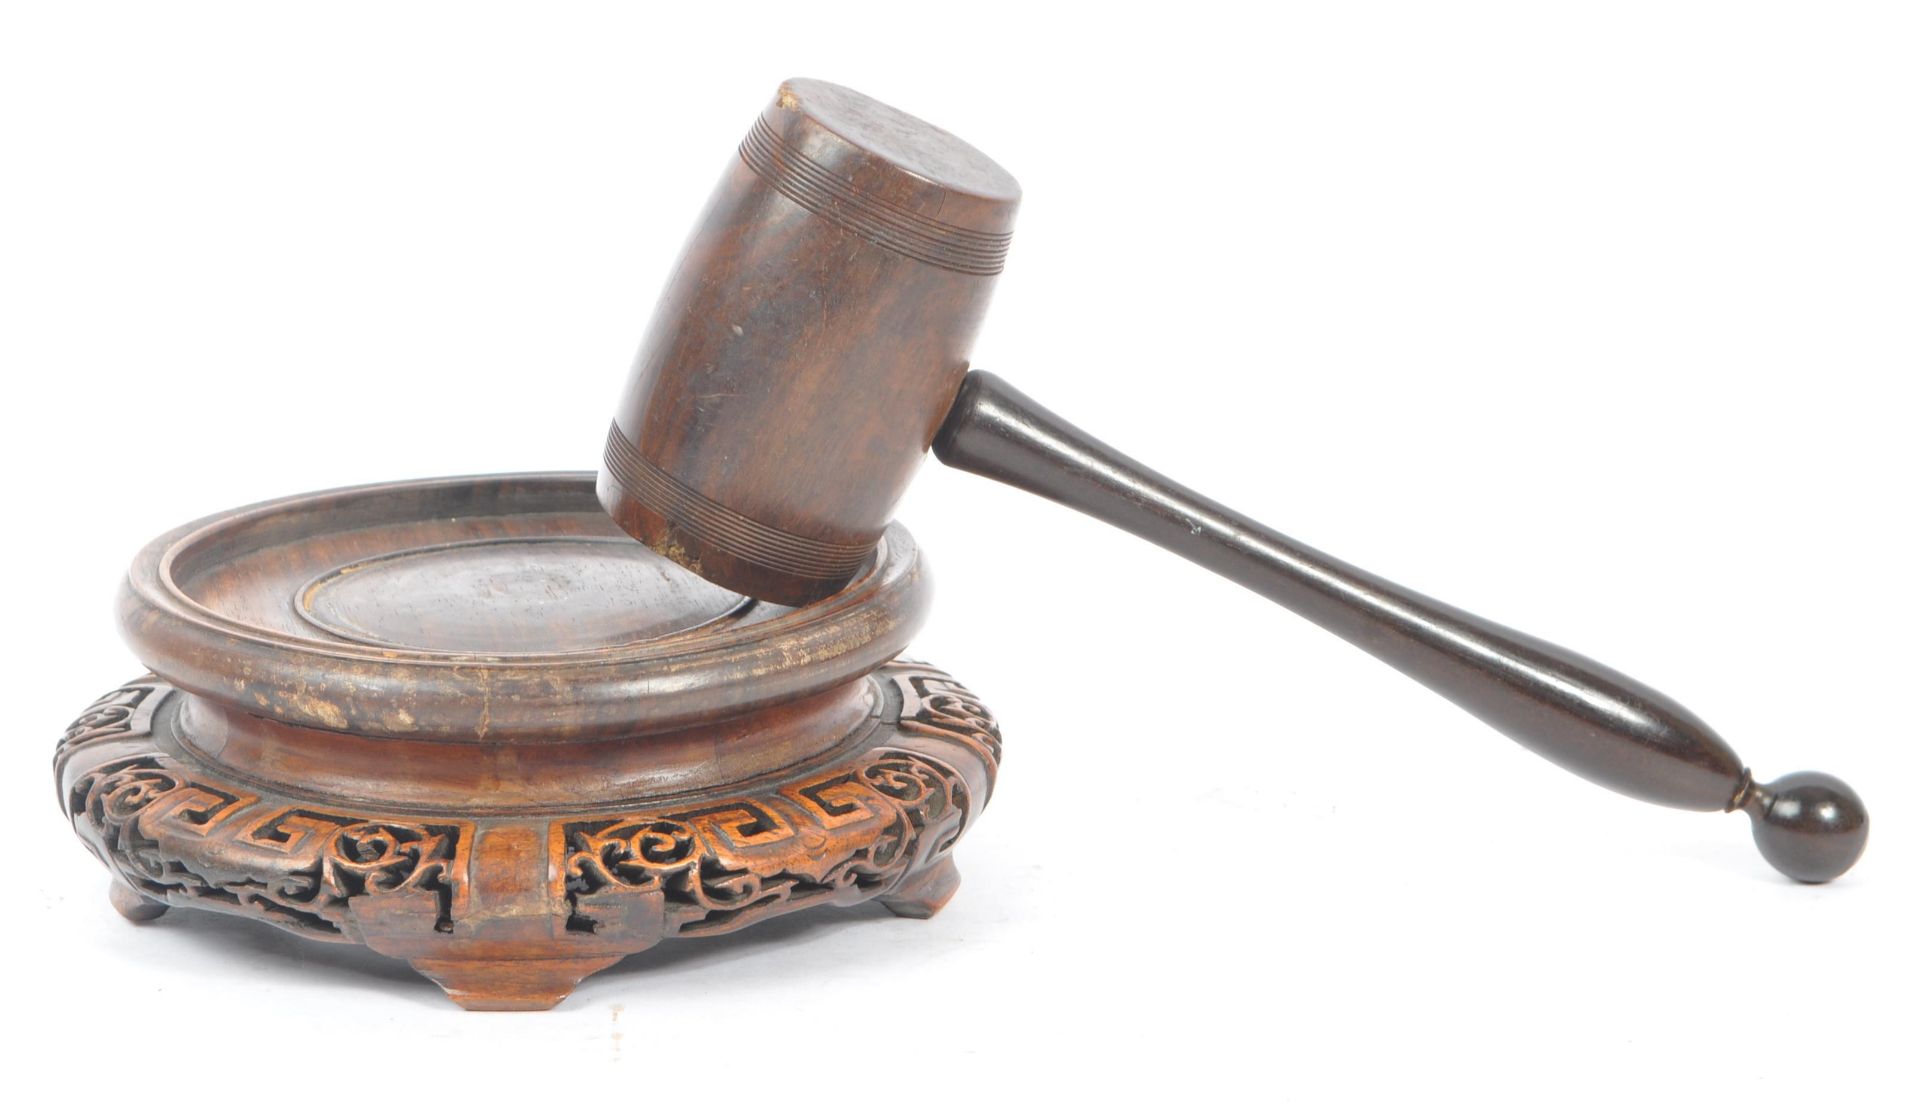 LARGE EARLY 20TH CENTURY AUCTIONEER'S GAVEL & STAND